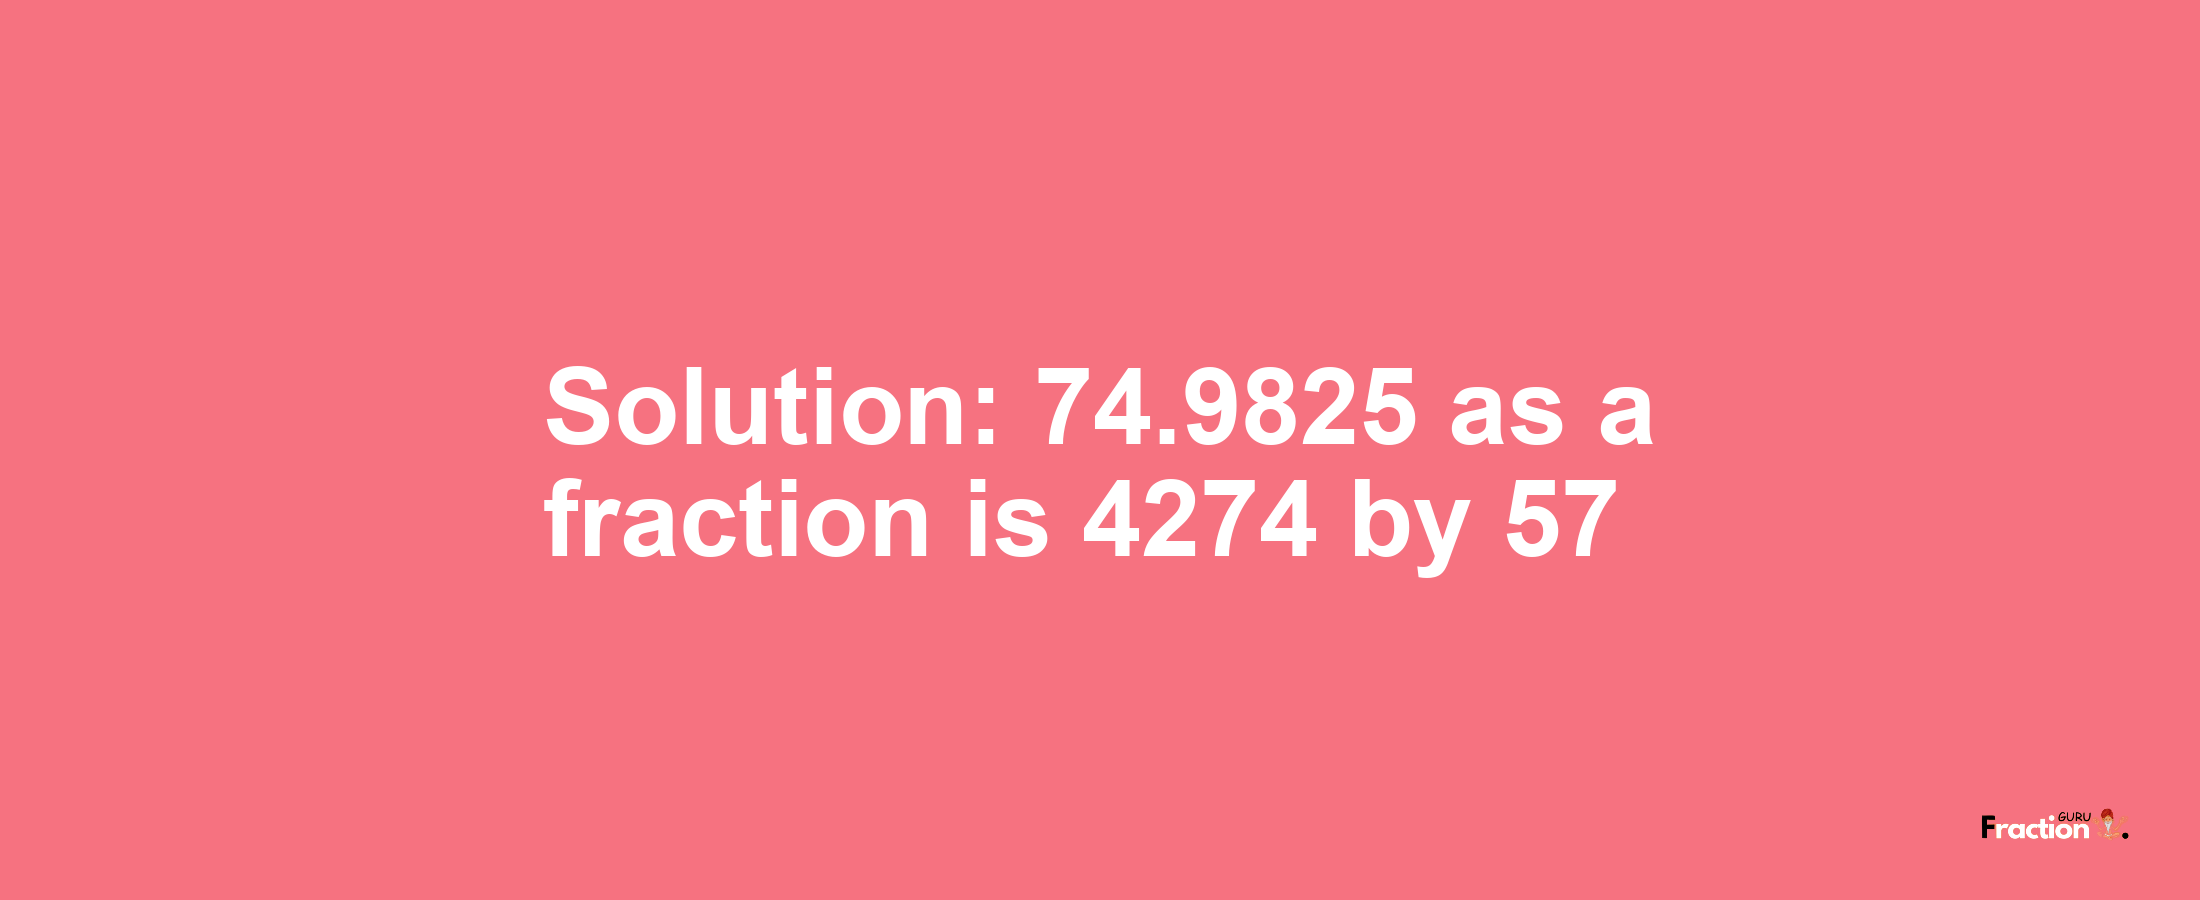 Solution:74.9825 as a fraction is 4274/57